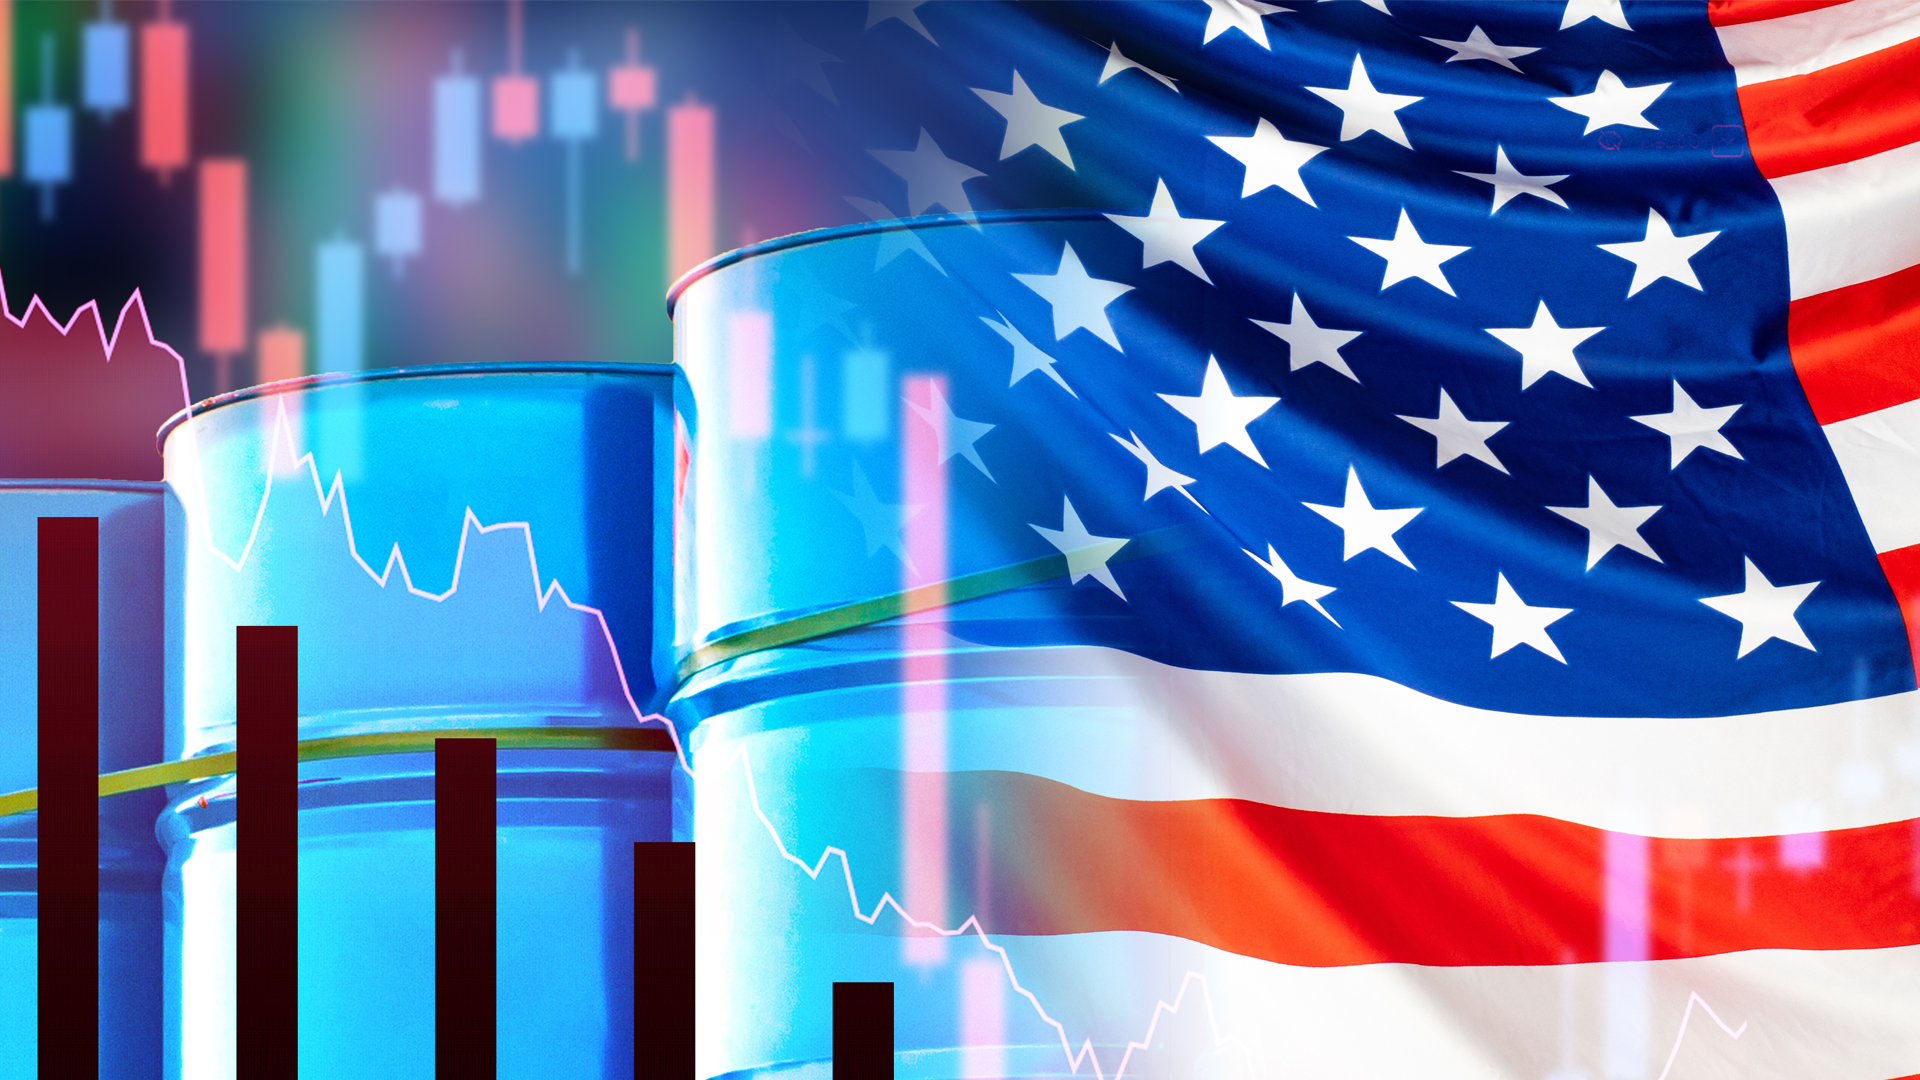 Barrels of oil next to the flag of the USA concept design graphic